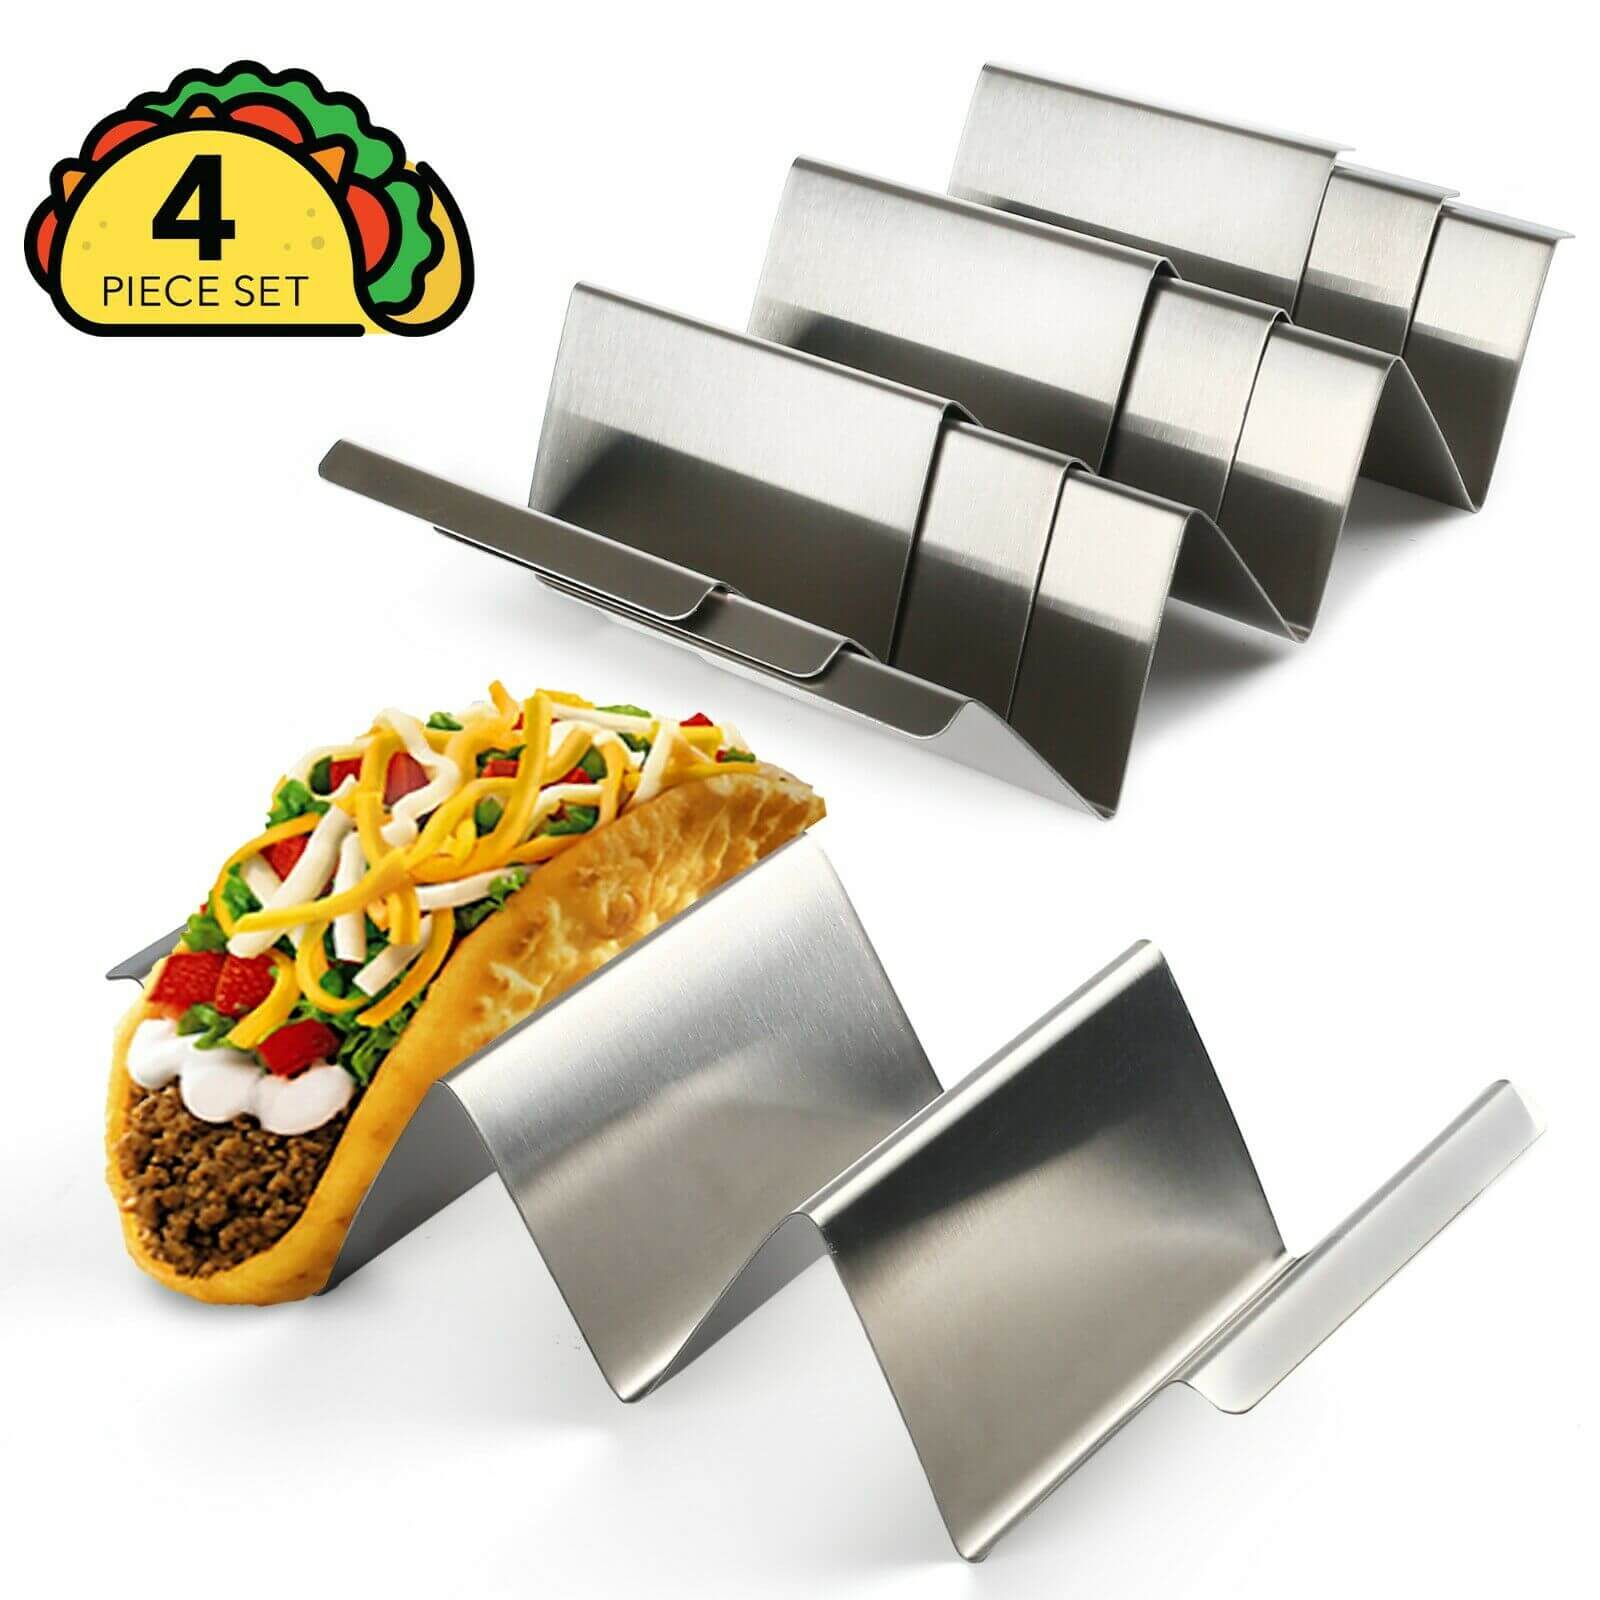 Taco Tuesday Holder Stands Set 4 Piece Safe Rack Tray Oven Grill